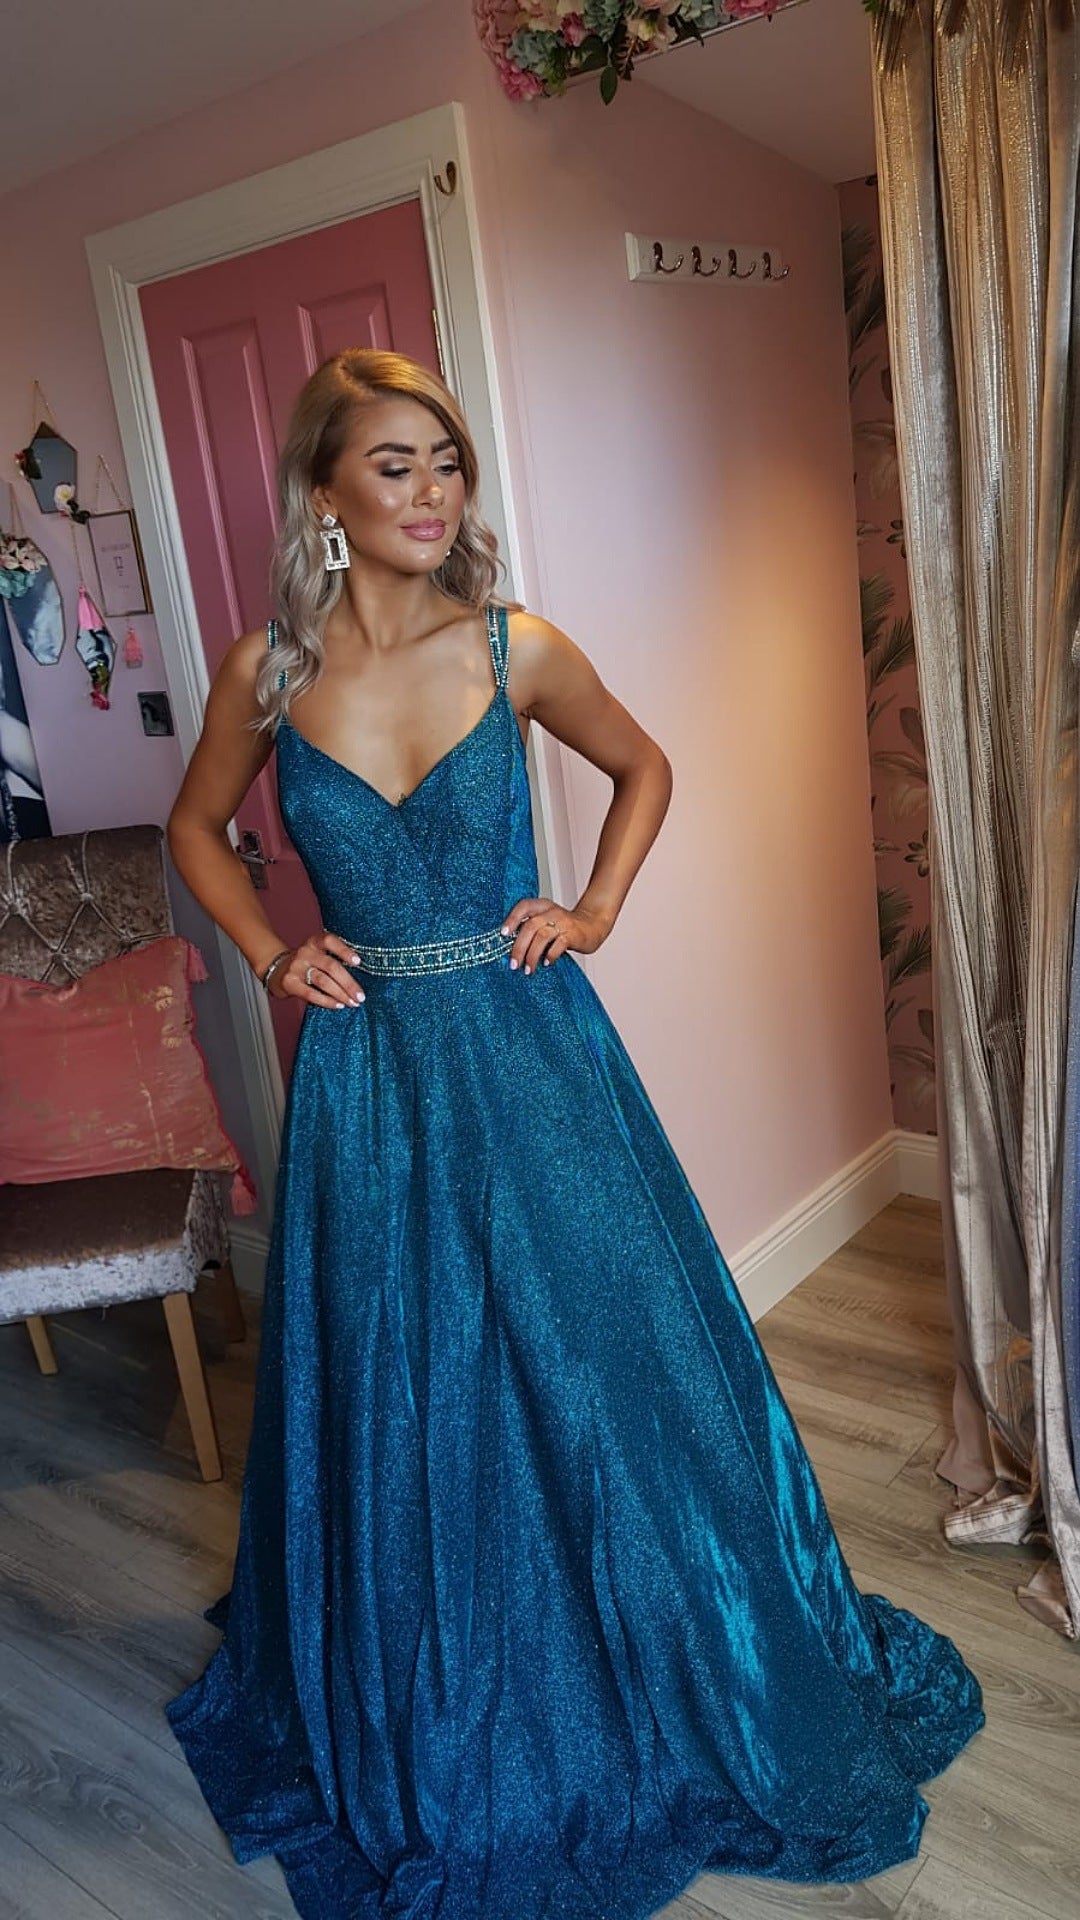 Alexa Blue Sparkle Skinny Strapped Ball gown Formal Prom Dress